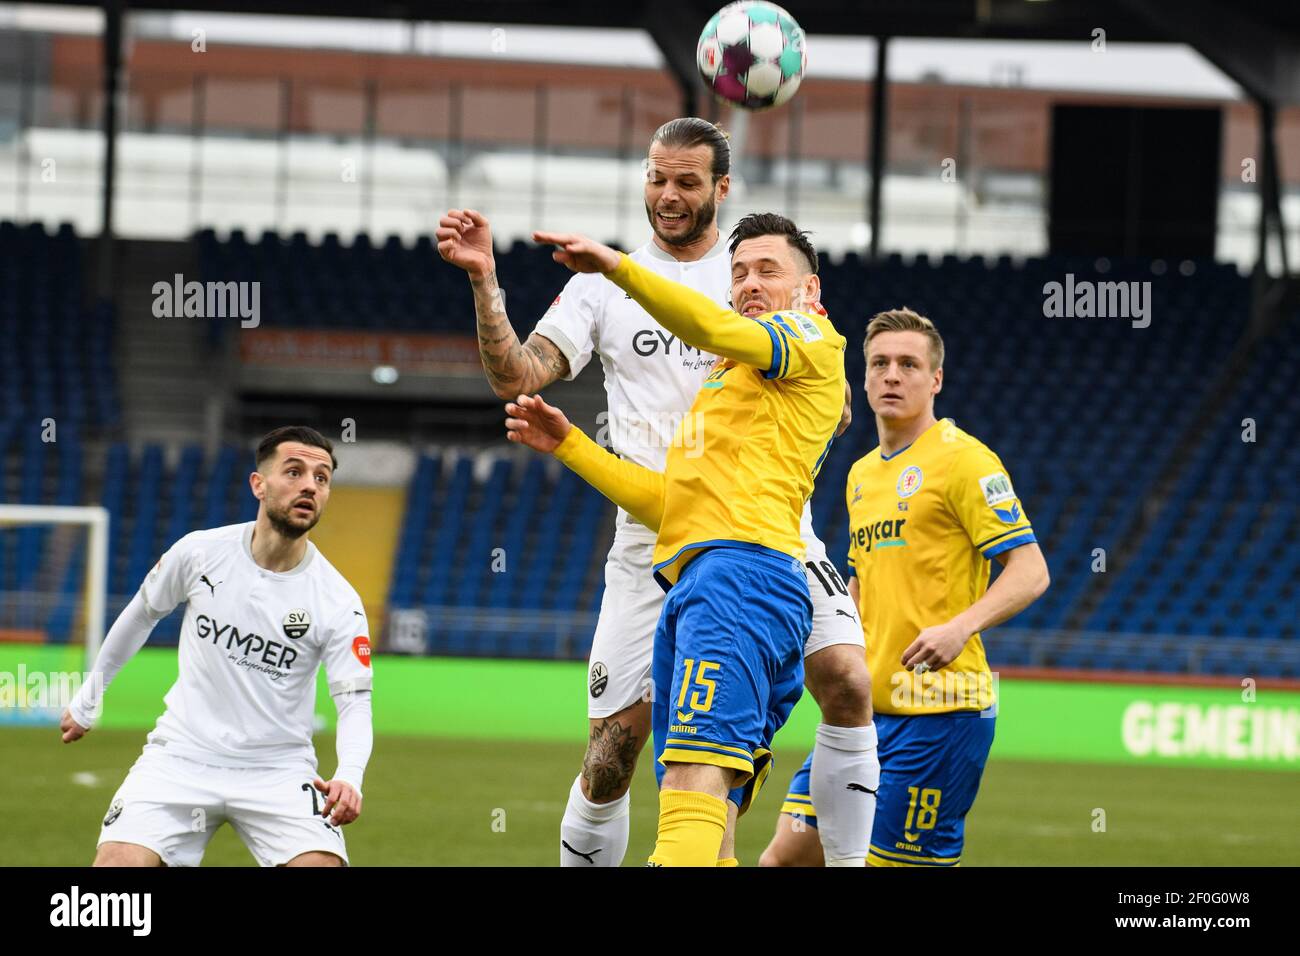 Brunswick, Germany. 07th Mar, 2021. Football: 2. Bundesliga, Eintracht Braunschweig - SV Sandhausen, Matchday 24 at Eintracht-Stadion. Braunschweig midfielder Marcel Bär (centre, r) plays against Sandhausen defender Dennis Diekmeier (centre, l). Credit: Swen Pförtner/dpa - IMPORTANT NOTE: In accordance with the regulations of the DFL Deutsche Fußball Liga and/or the DFB Deutscher Fußball-Bund, it is prohibited to use or have used photographs taken in the stadium and/or of the match in the form of sequence pictures and/or video-like photo series./dpa/Alamy Live News Stock Photo